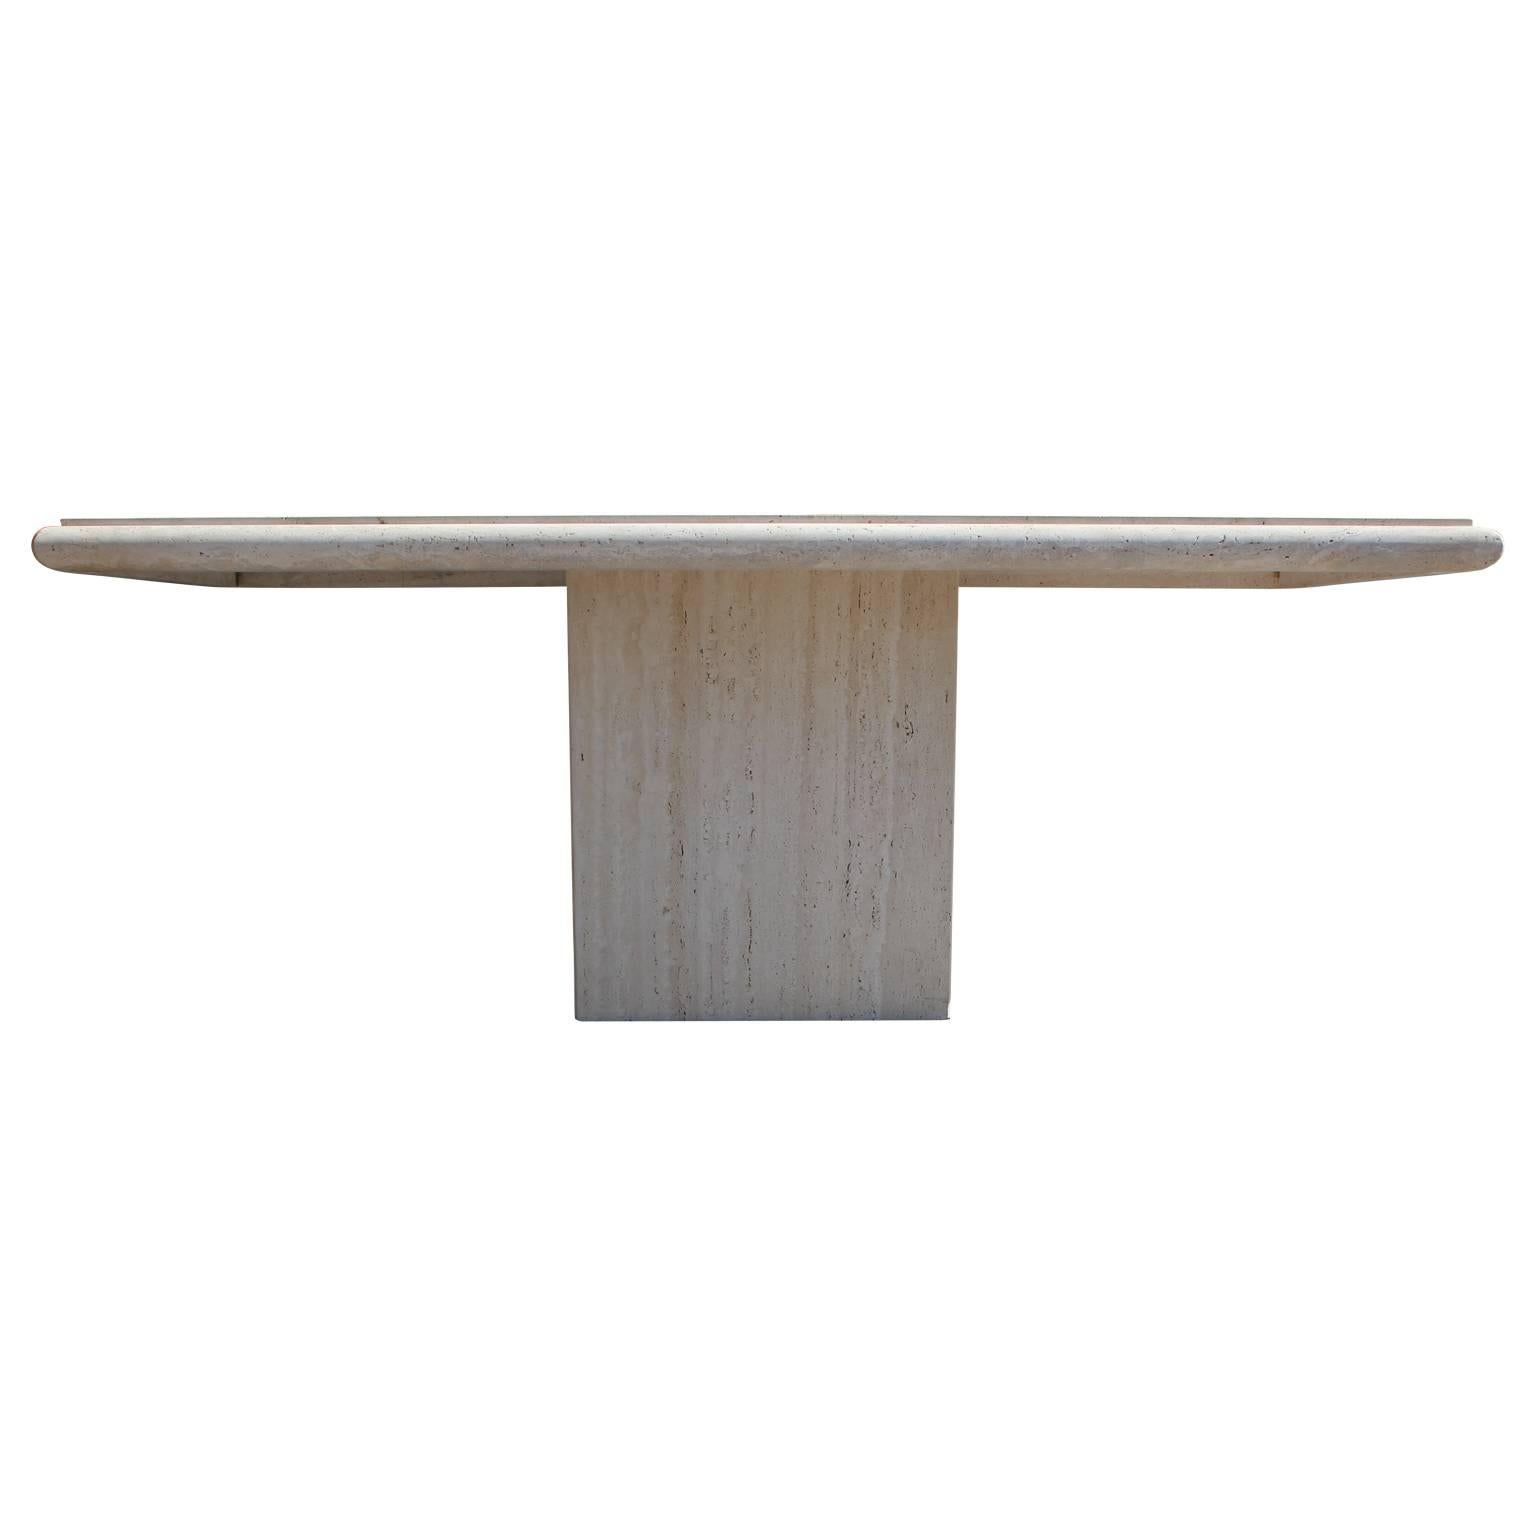 Gorgeous rectangular travertine dining table that sits on a lovely travertine pedestal.  The table top has beveled edges providing a lovely and subtle detail. Gorgeous for any mod, mid-mod or Hollywood Regency home.